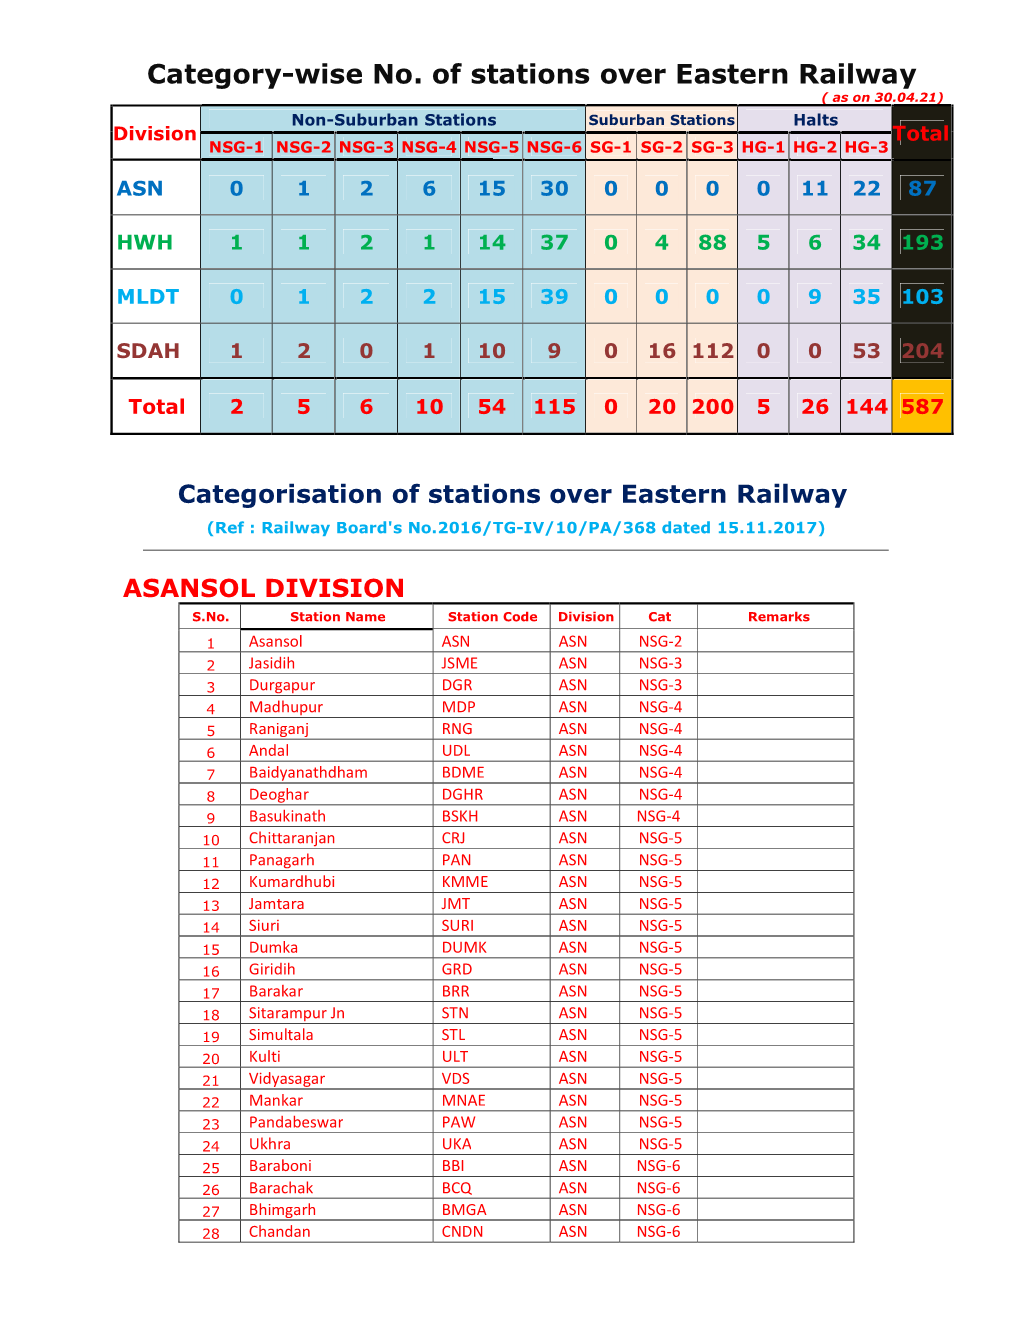 Category-Wise No. of Stations Over Eastern Railway